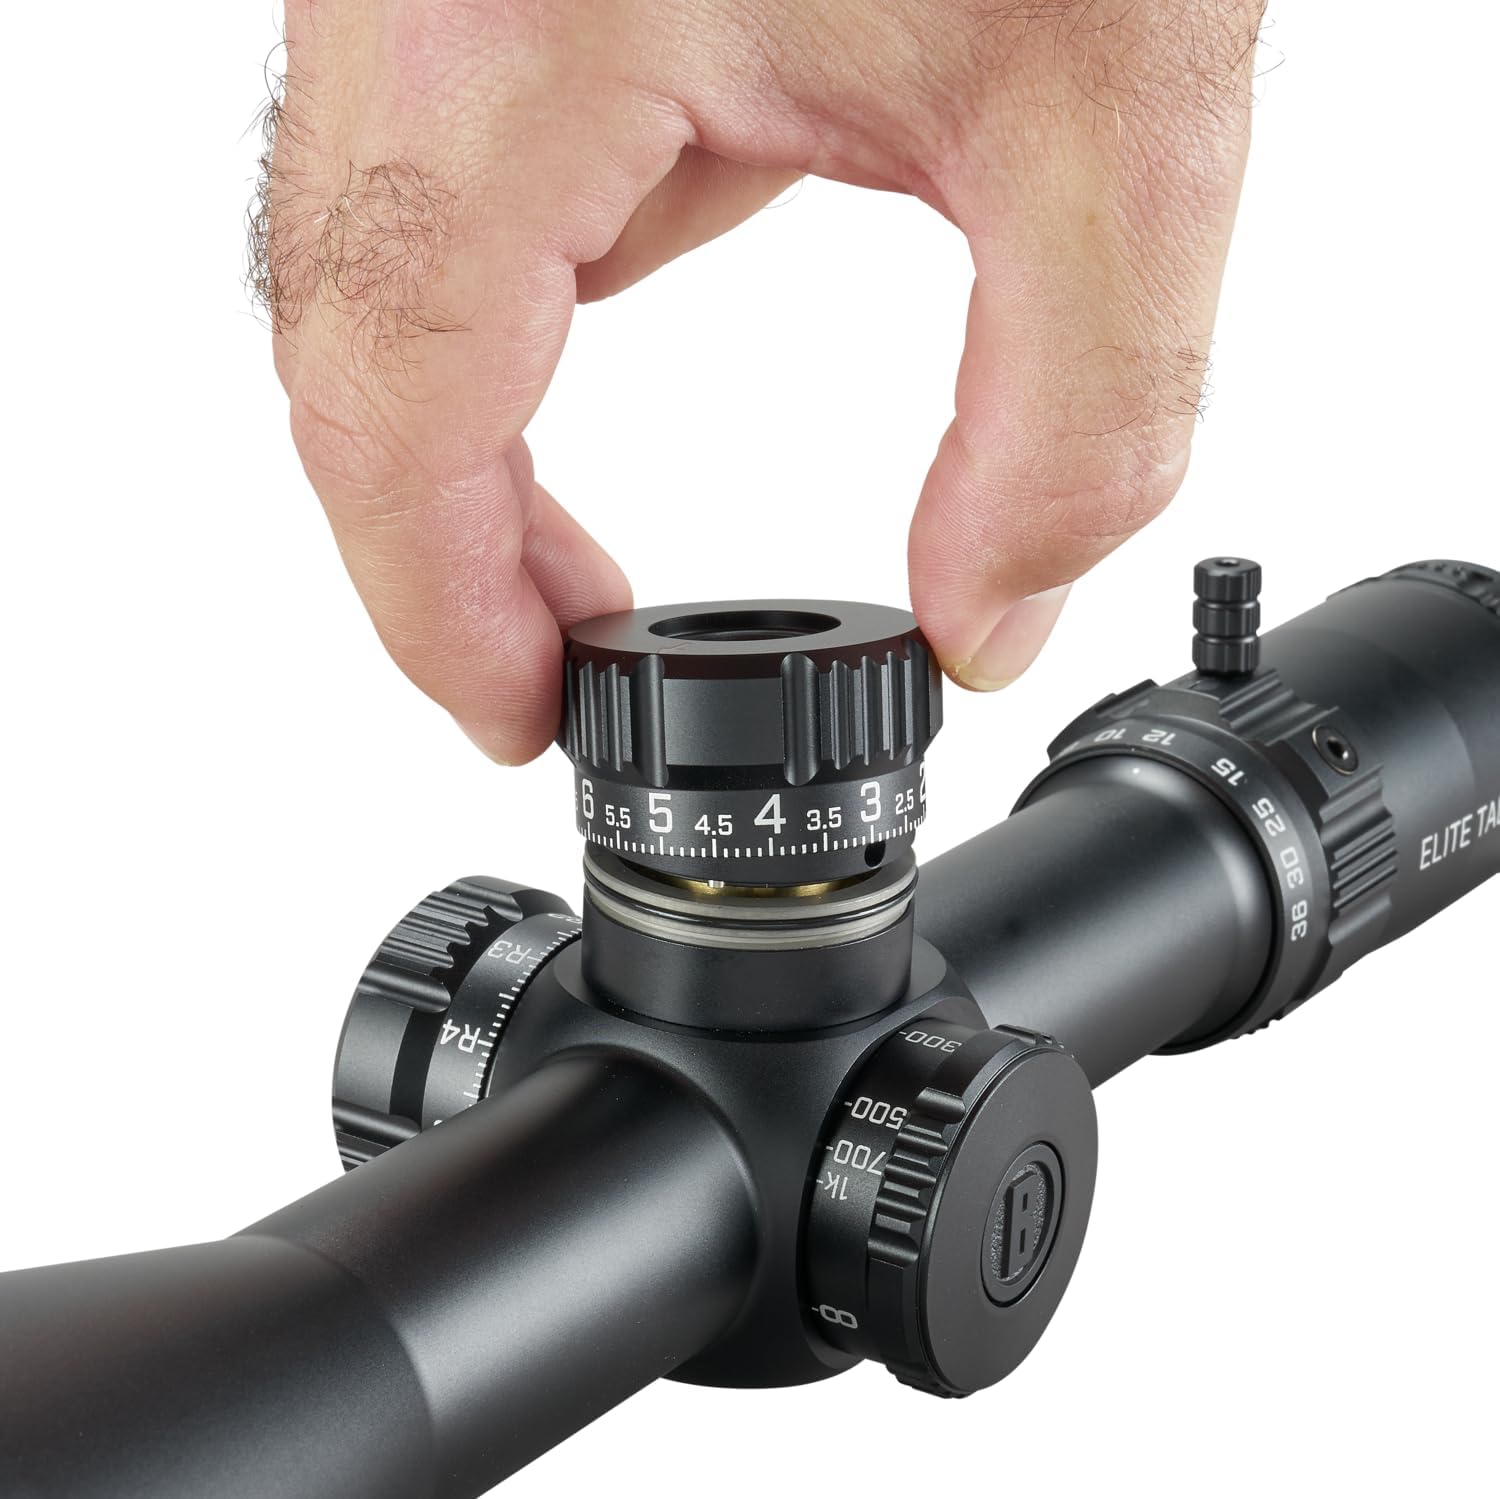 Bushnell Elite Tactical 6-36x56mm XRS3 Riflescope, Professional Grade, Long Range Competition Riflescope with ED Prime Objective - Bushnell Elite Tactical Riflescope Review